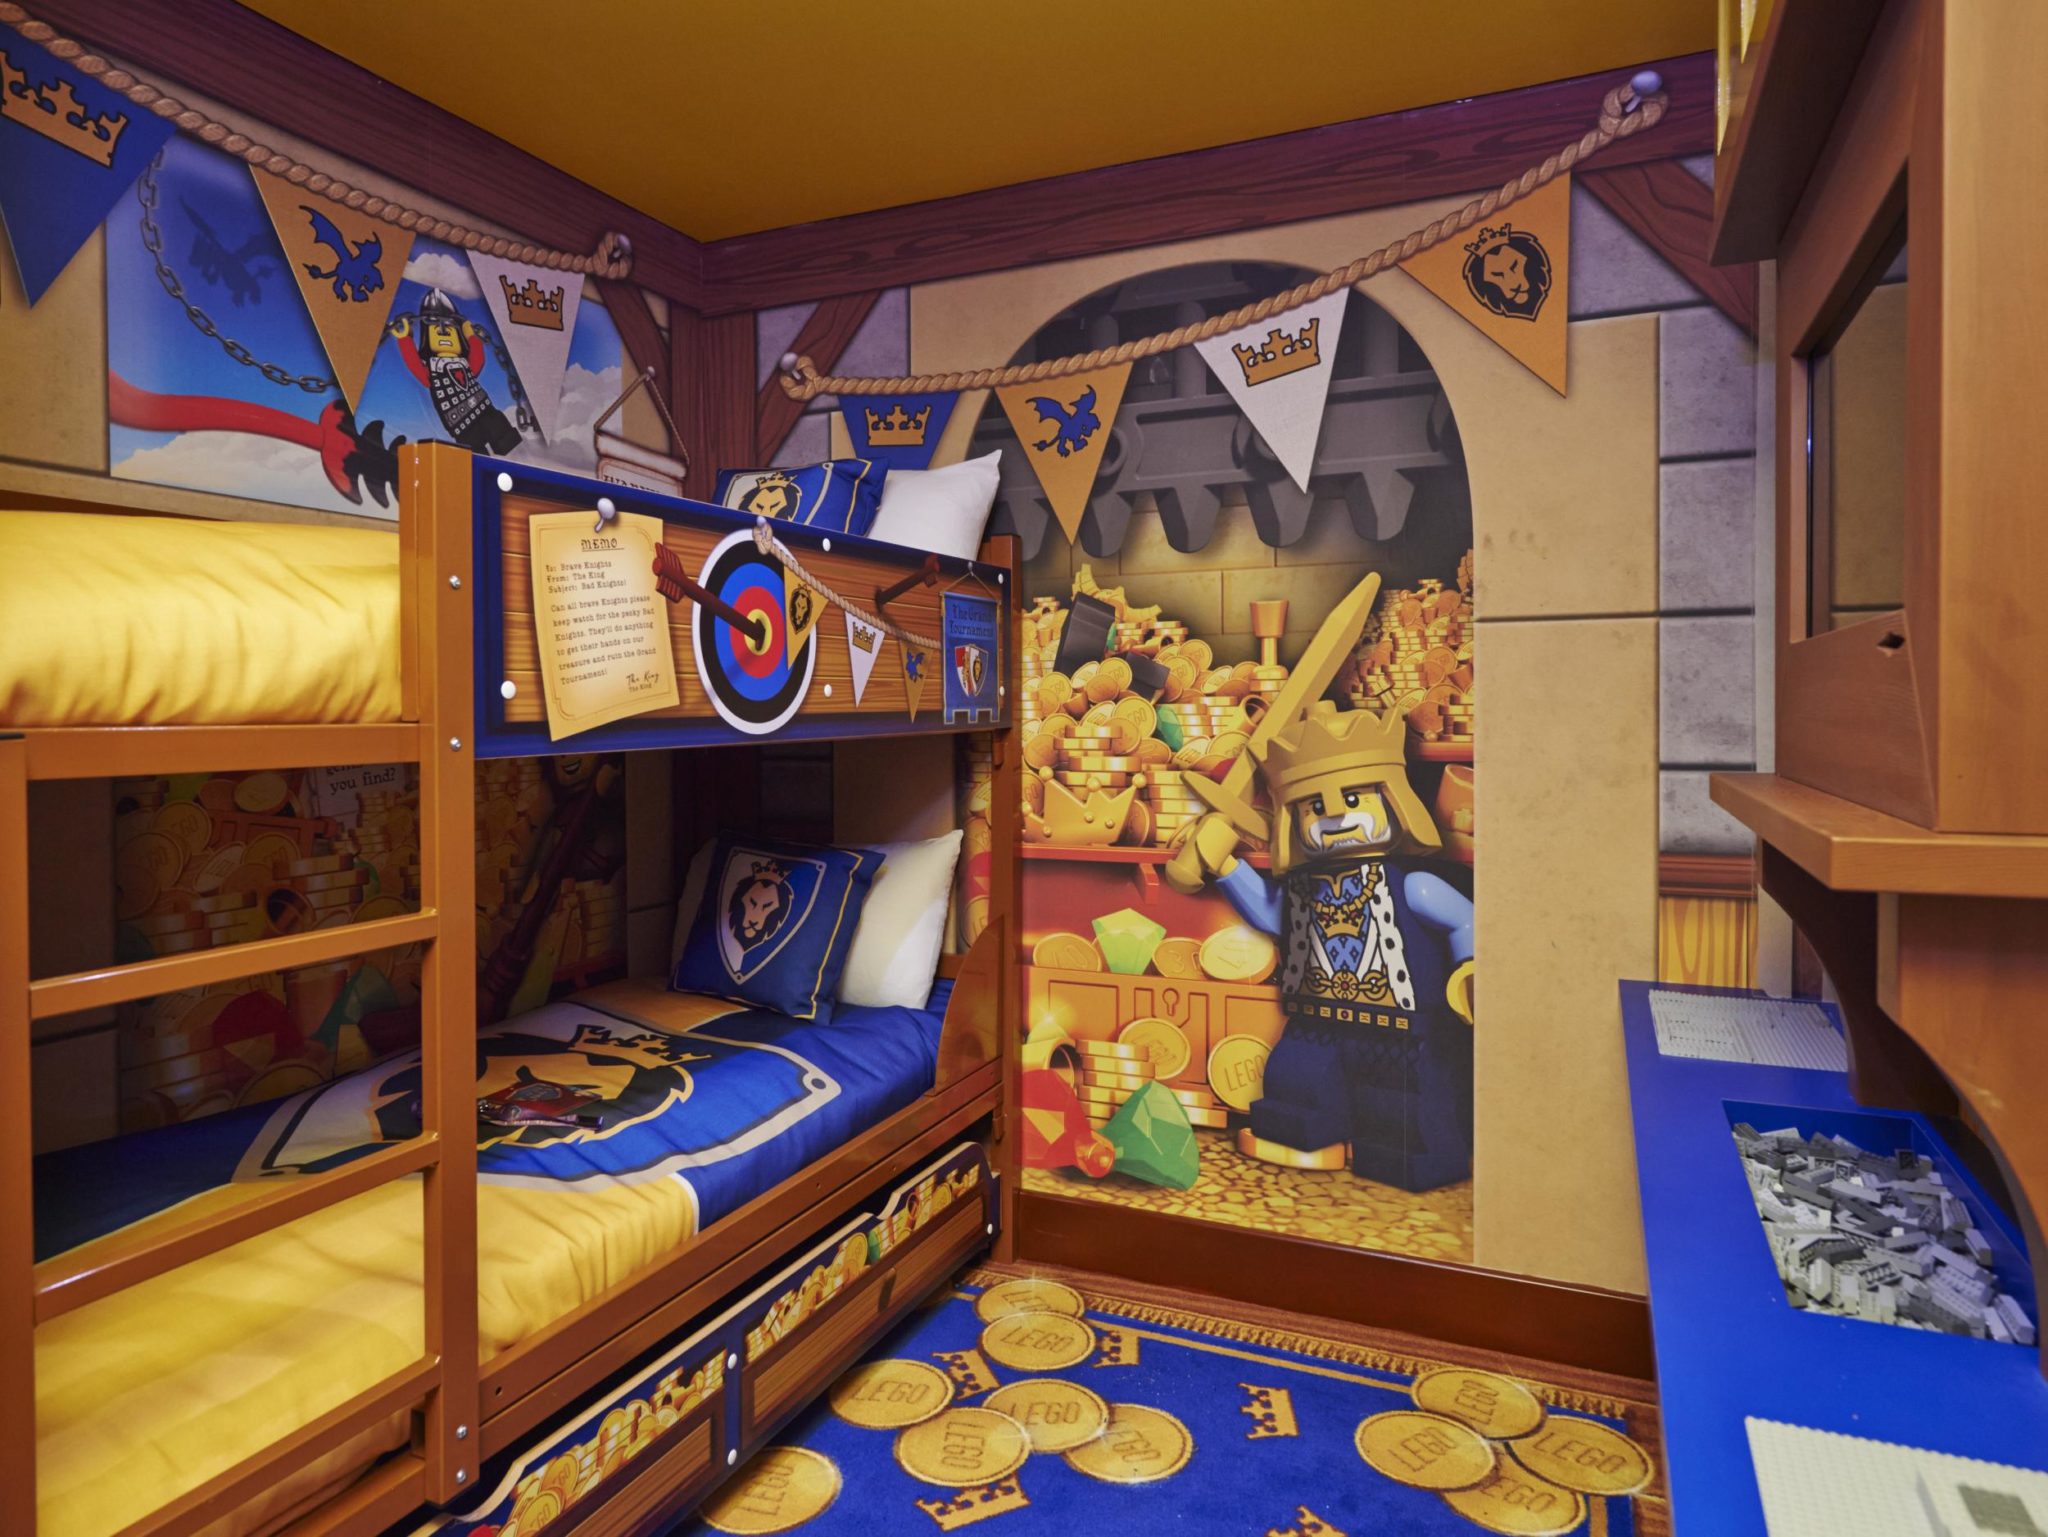 A LEGO castle themed childrens area with a bunkbed